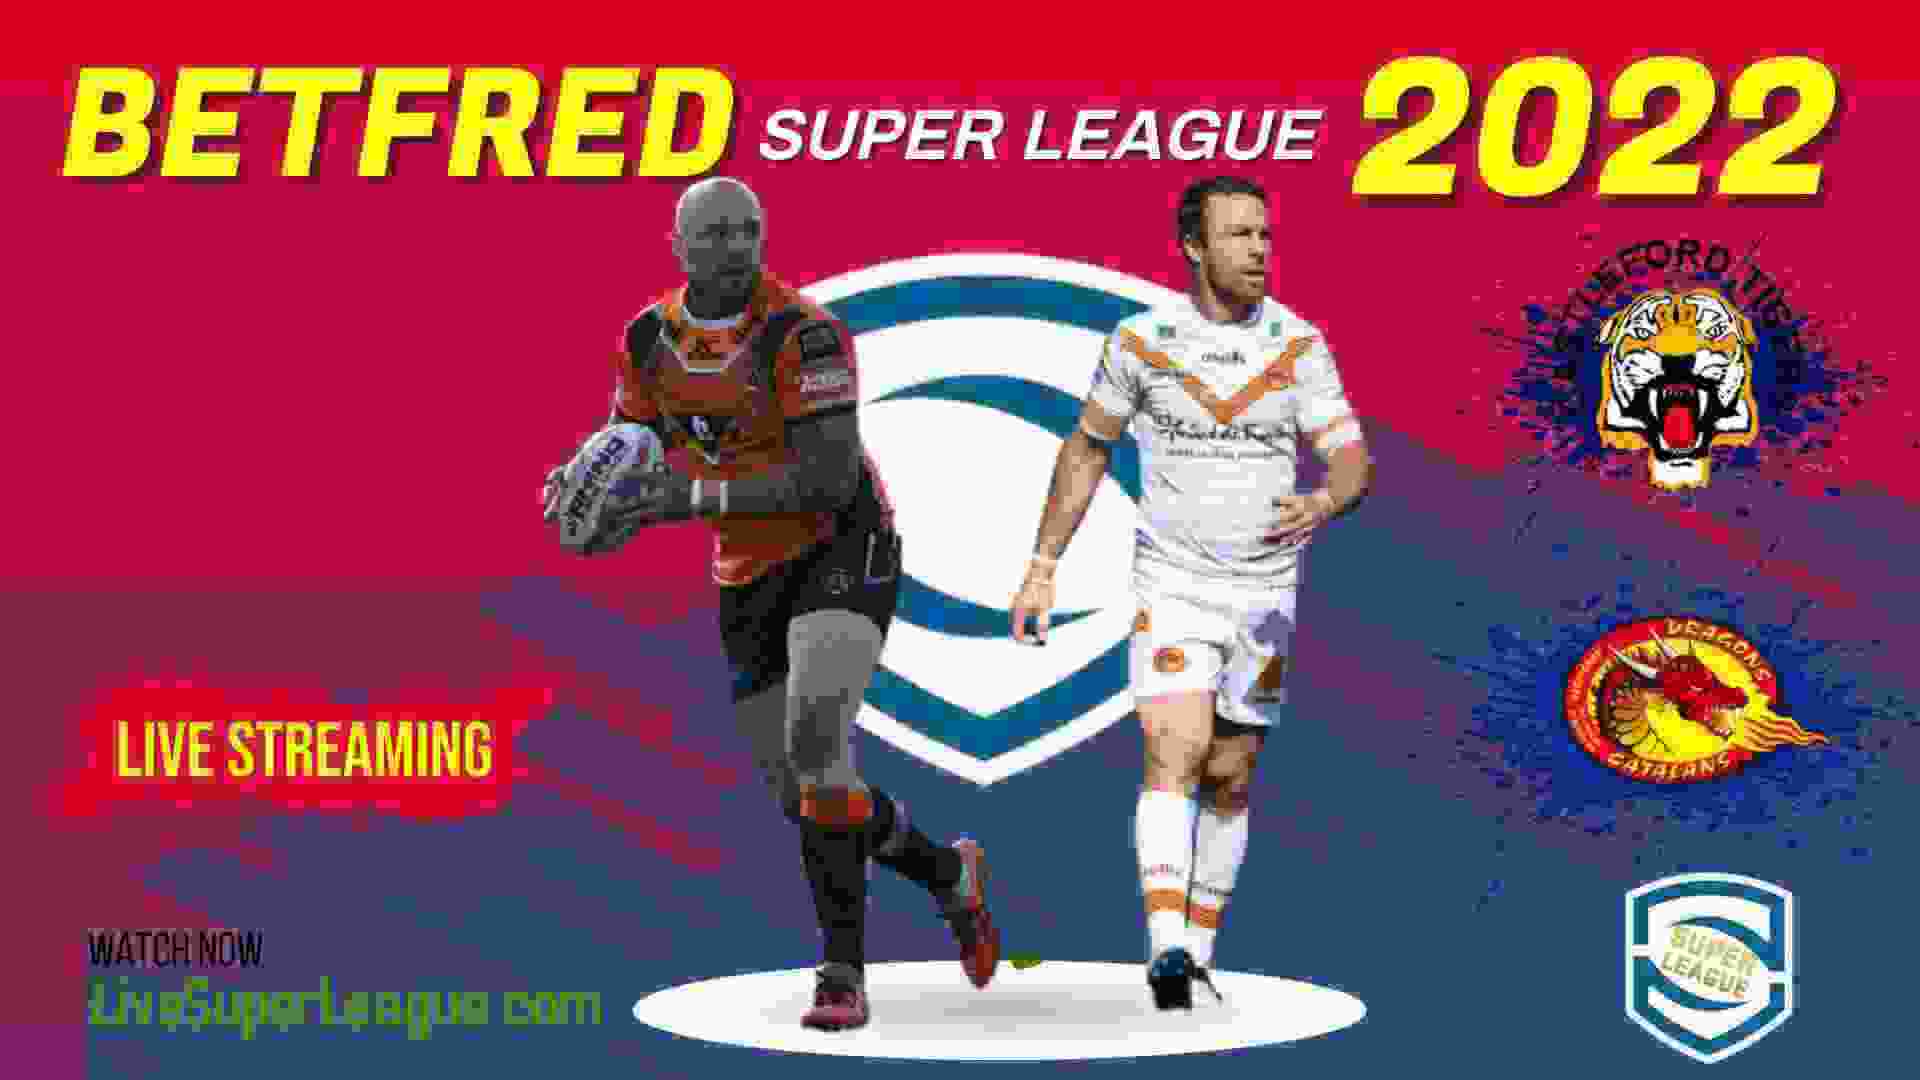 Live Castleford Tigers VS Catalans Dragons Streaming